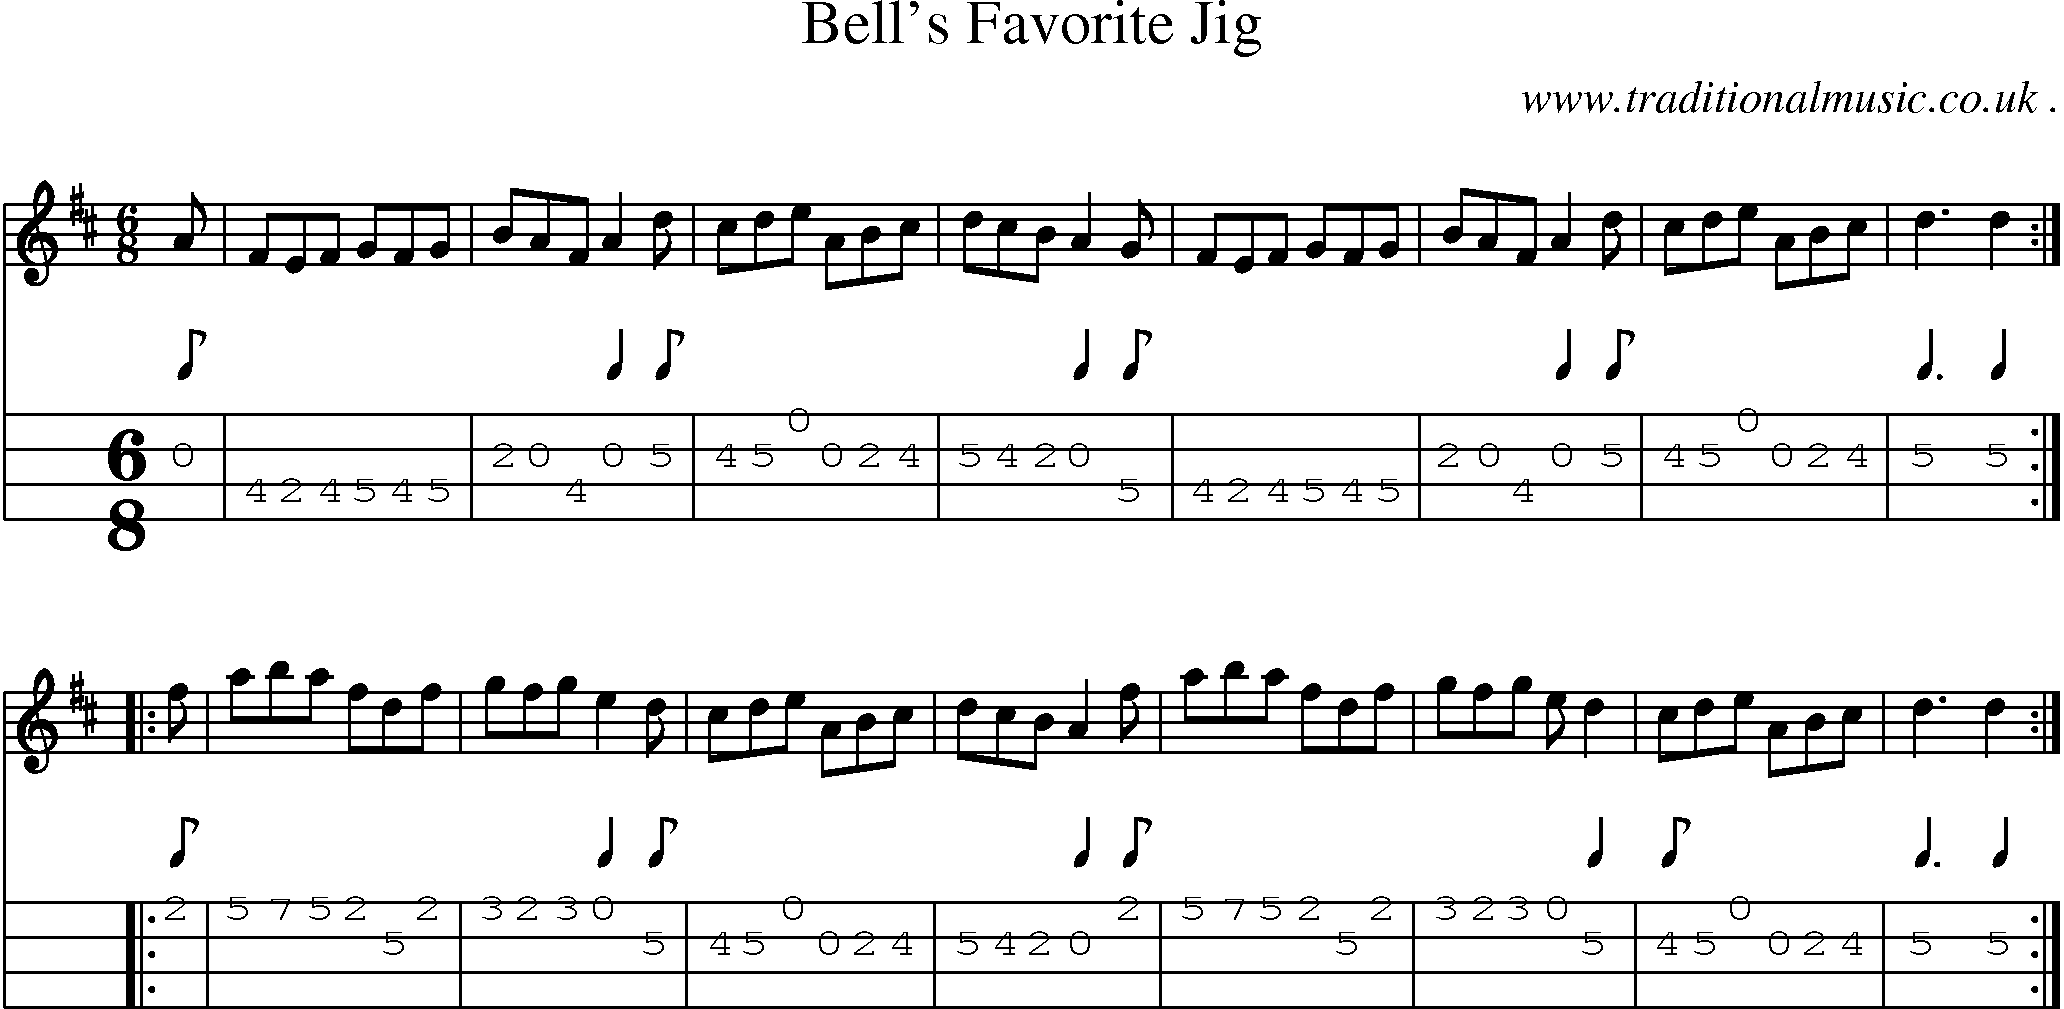 Sheet-music  score, Chords and Mandolin Tabs for Bells Favorite Jig